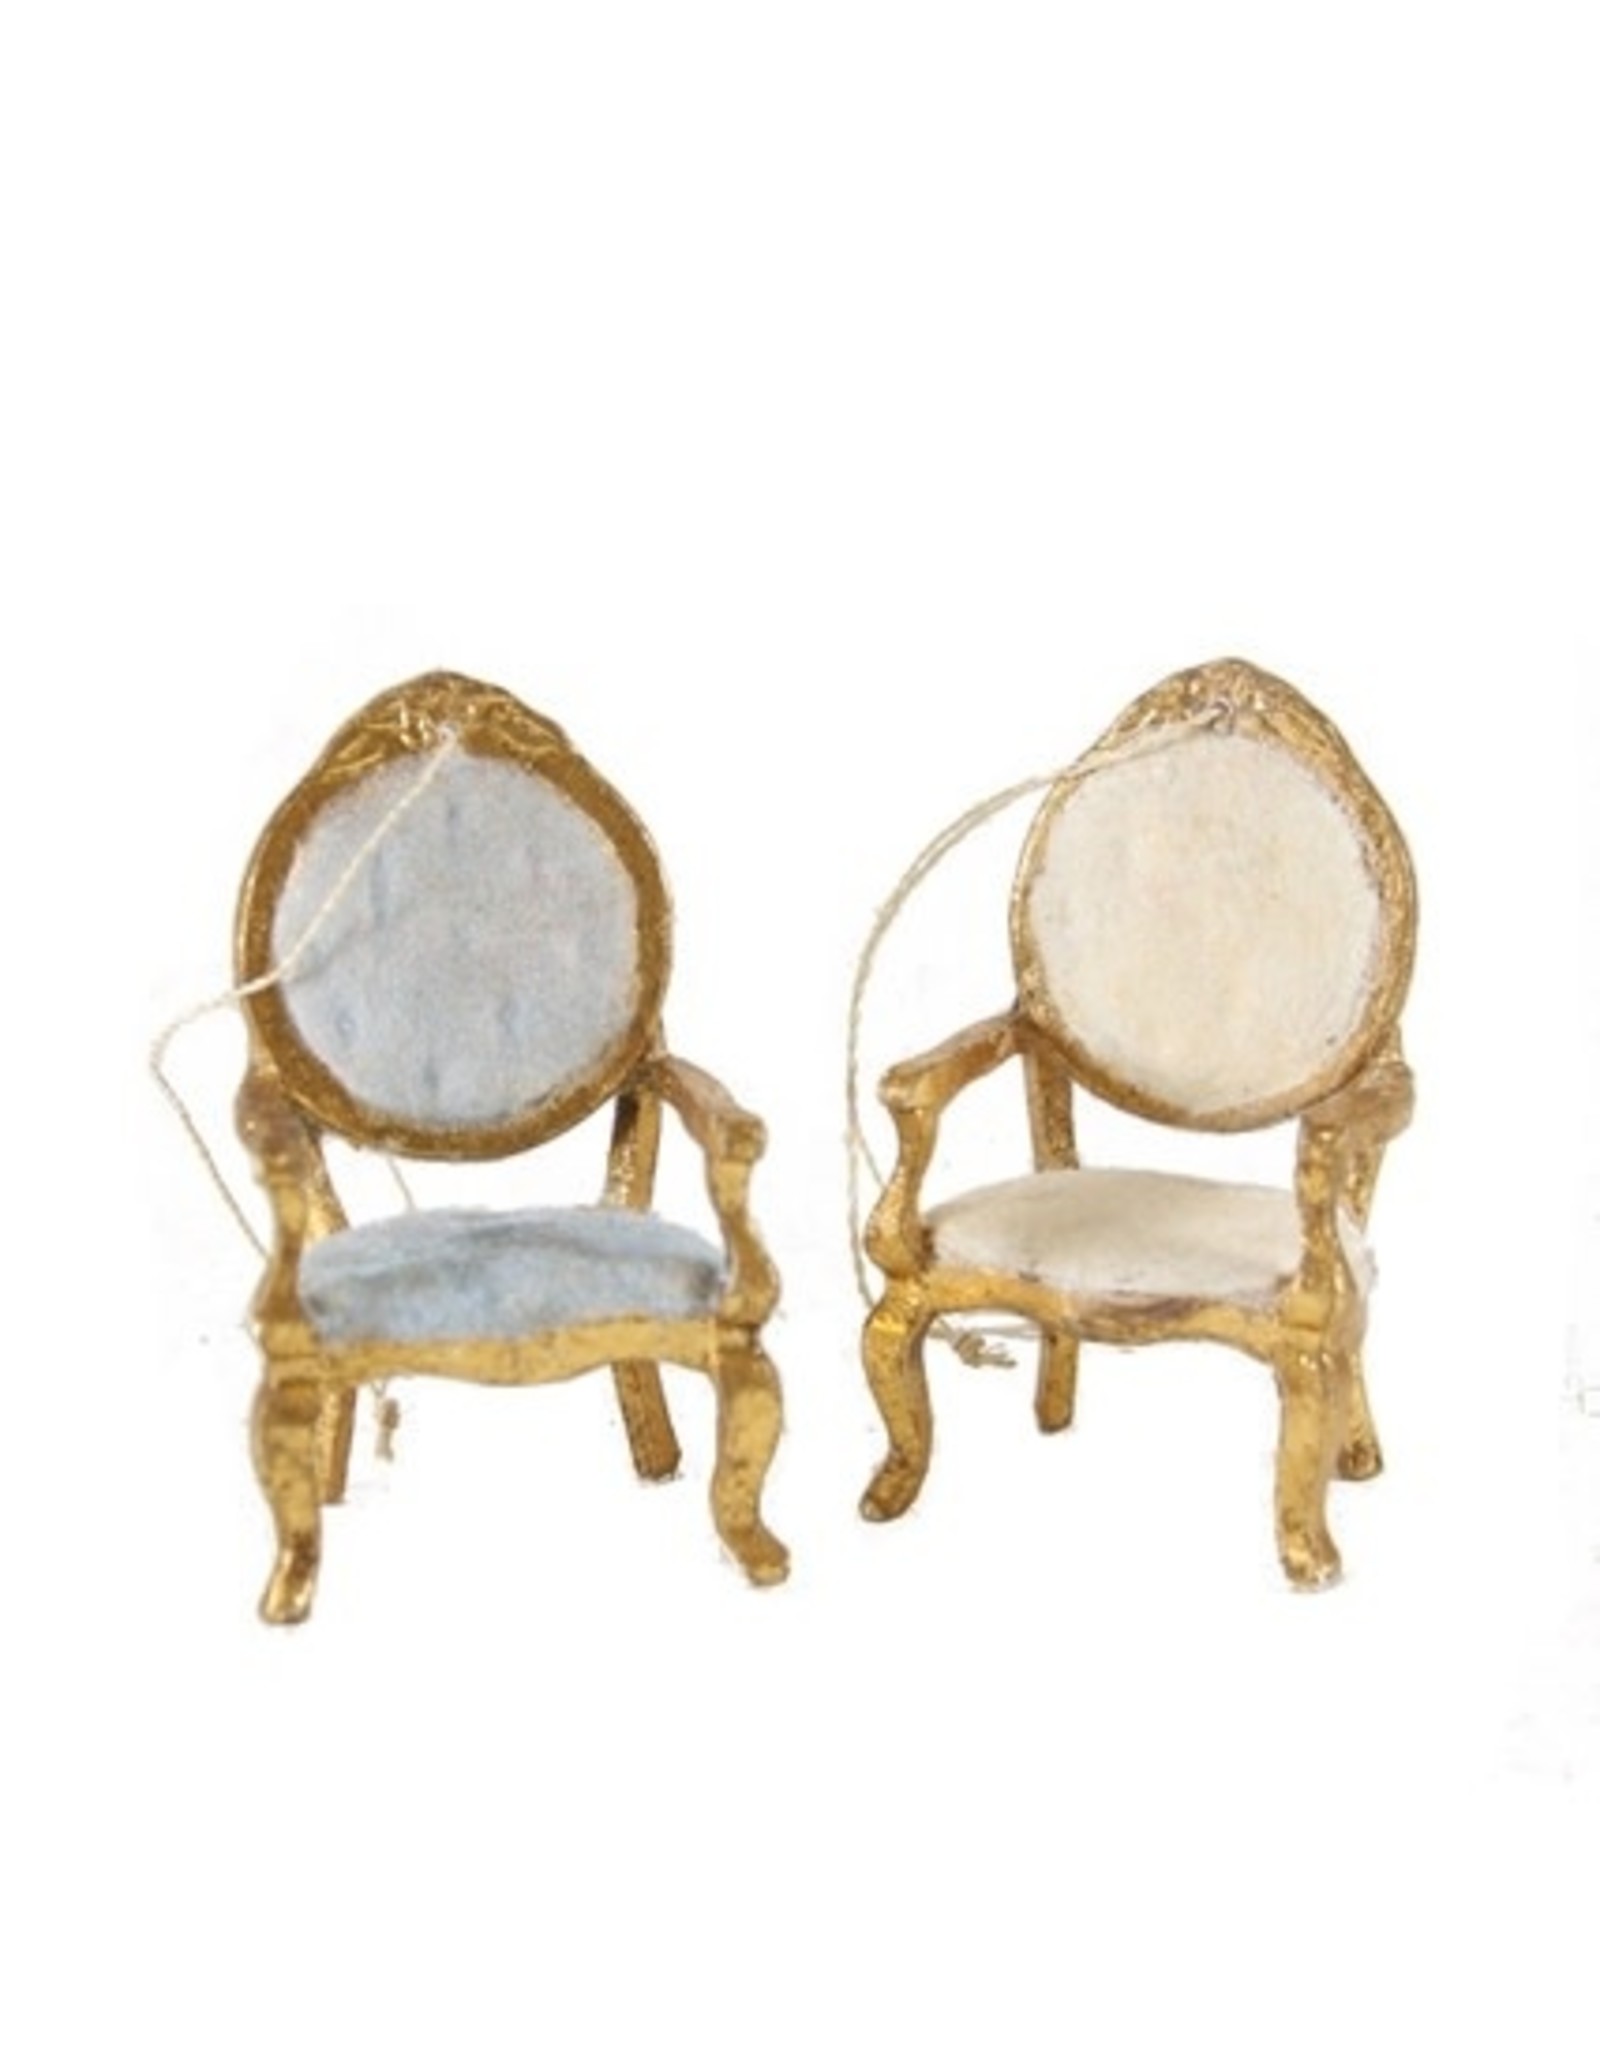 Cody Foster & Co. SIDE CHAIR ORNAMENT - 2 STYLES - WHITE / BLUE